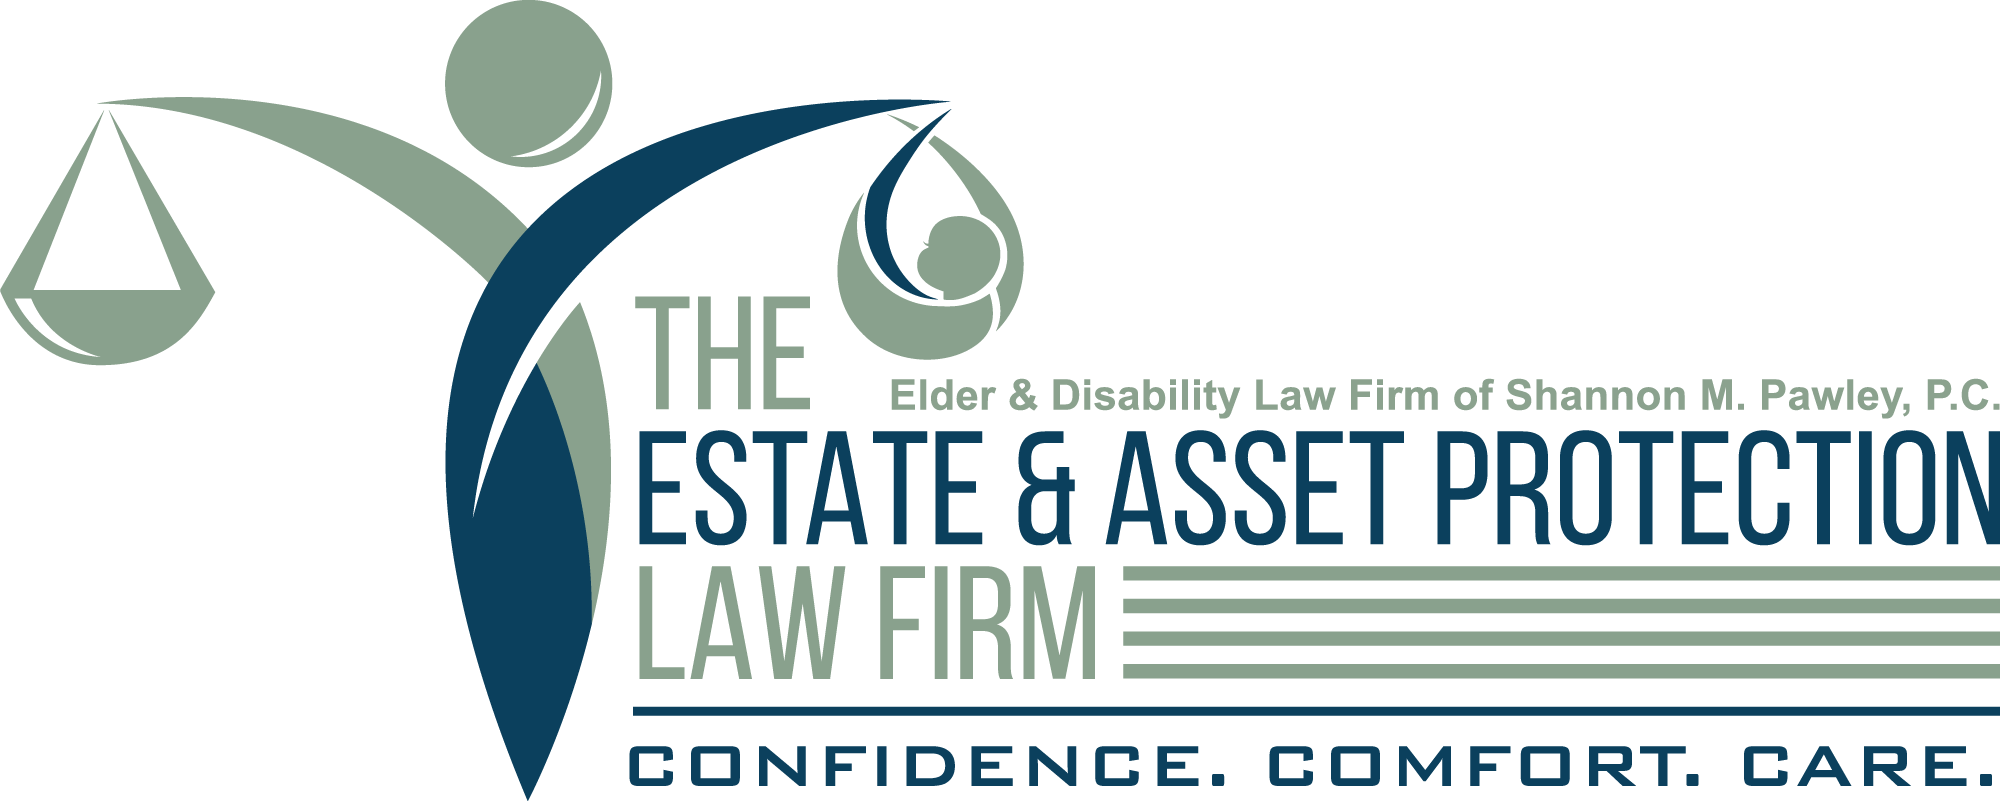 Image of new decade long term care planning Happy New Year estate planning asset protection  on estate management asset protection law site